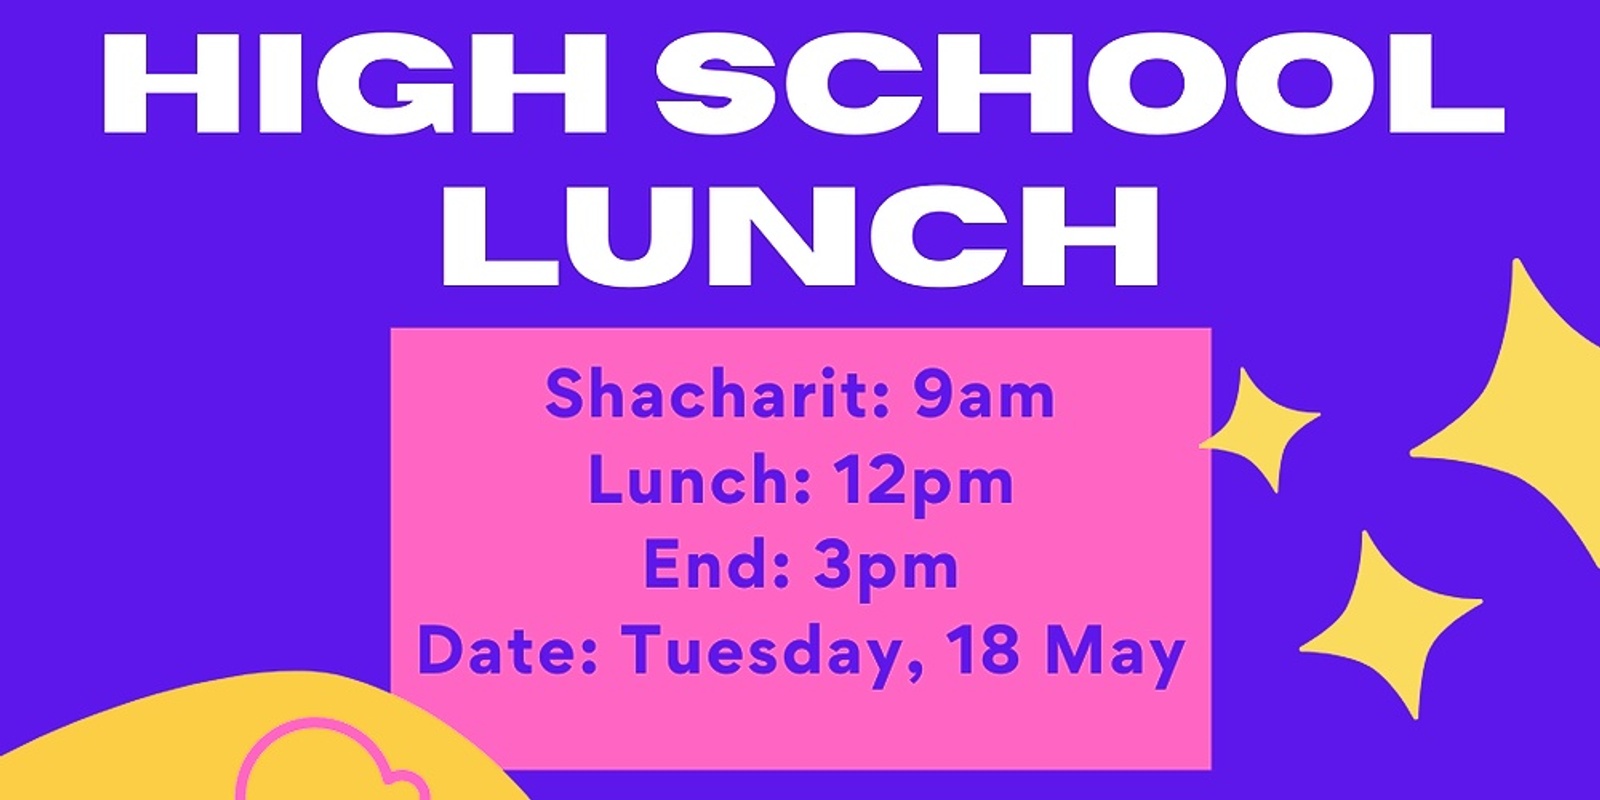 Banner image for High School Shavuot Lunch with Shevet Yuval